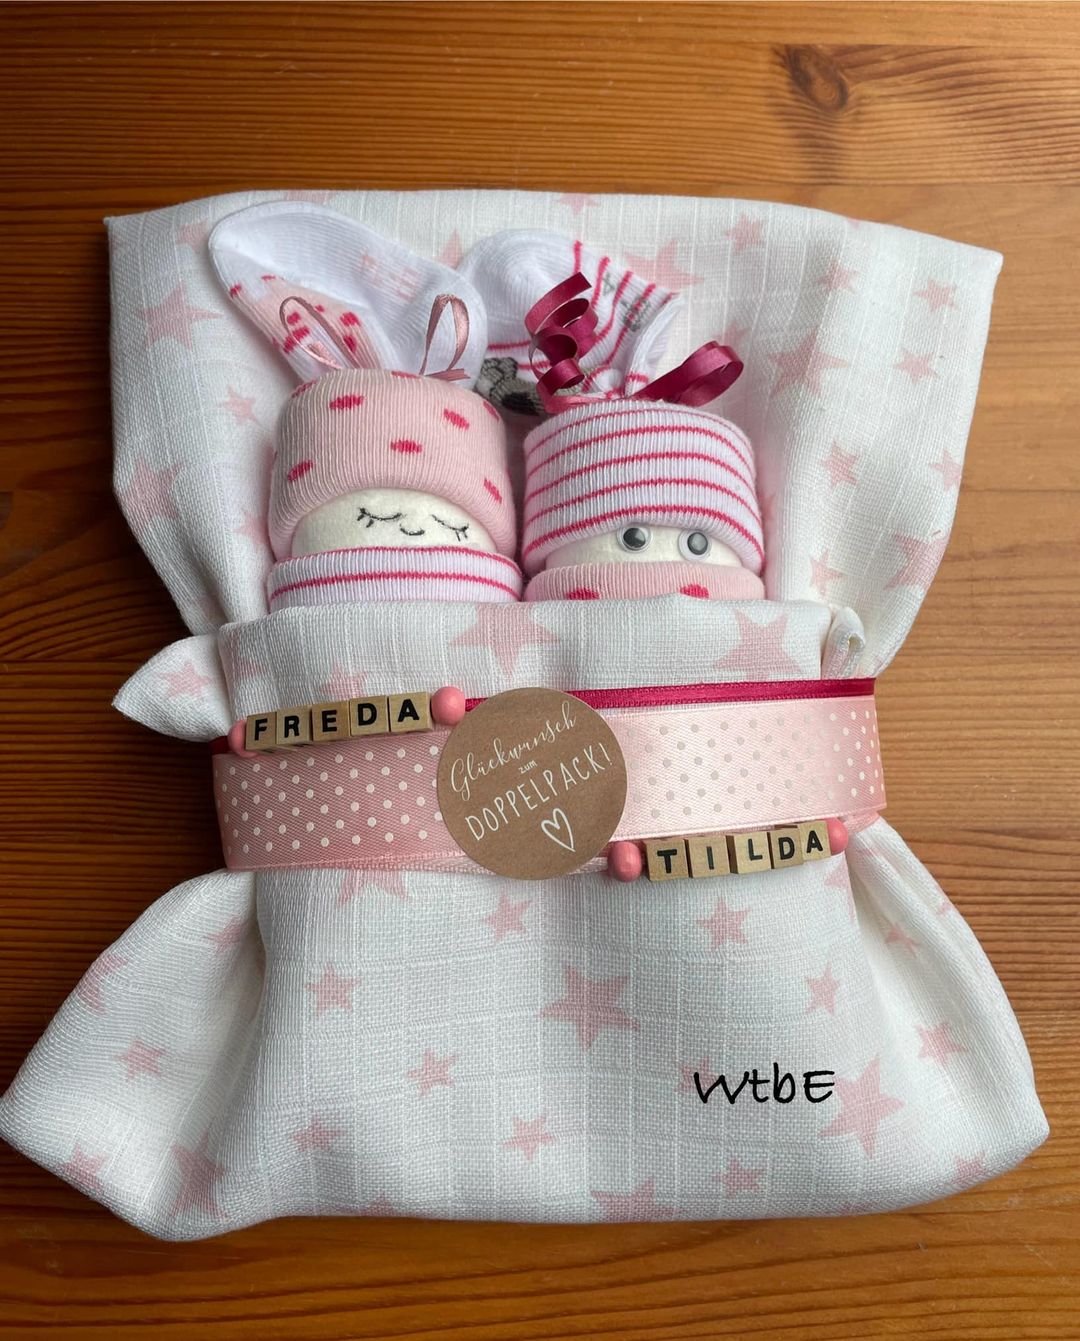 baby burp cloth diapers for twin girls, personalized with wooden letters for Freda and Tilda